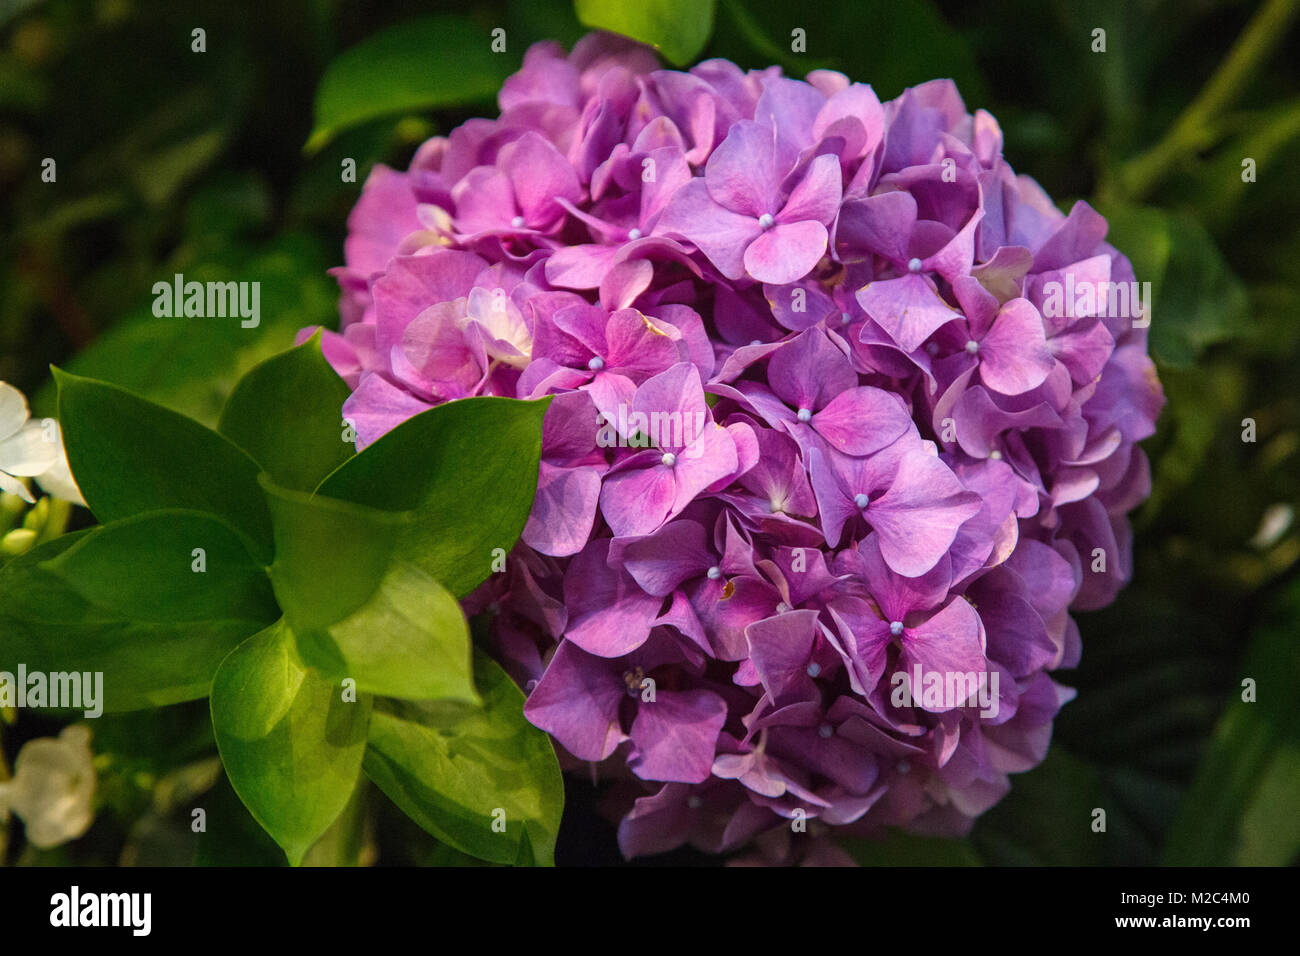 Pink and purple hydrangea in bloom, close-up Stock Photo